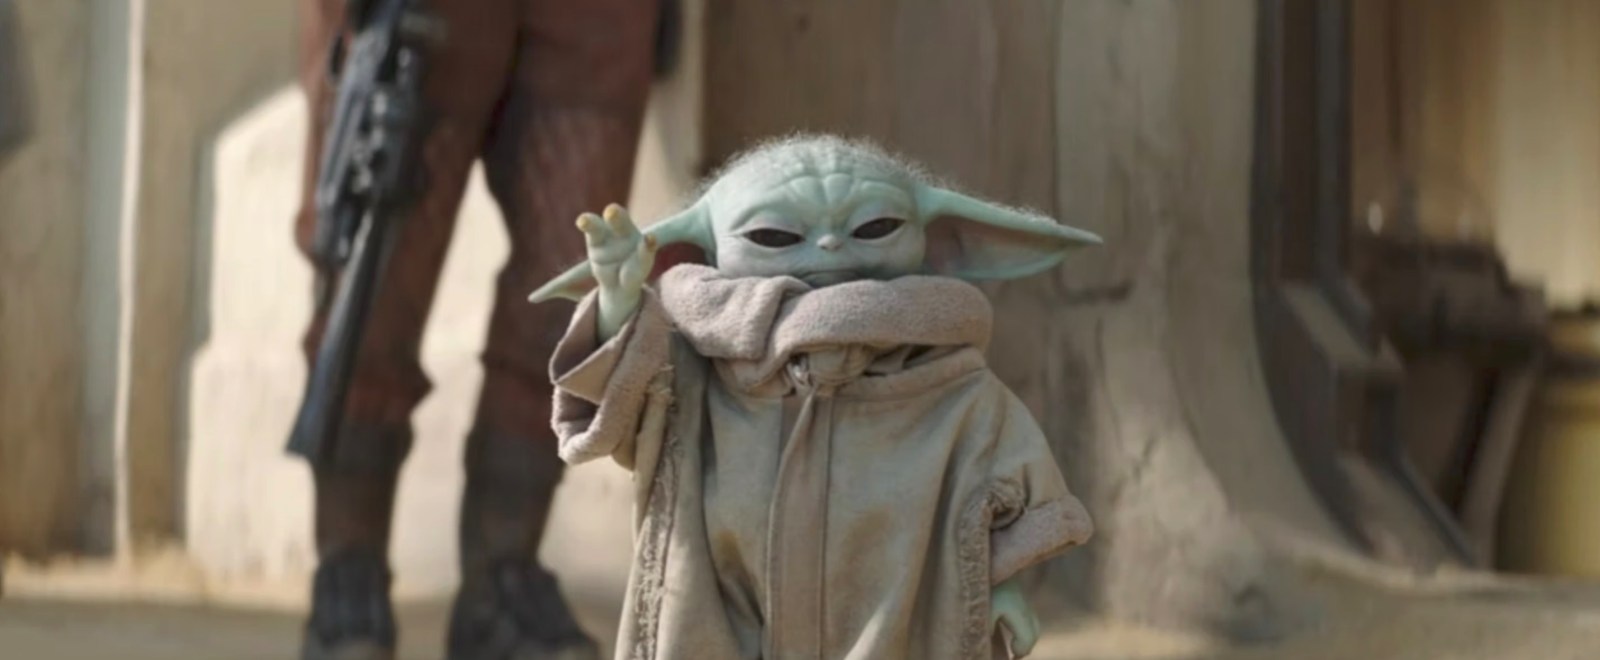 Baby Yoda Represents the Past, Present and Future of Hollywood